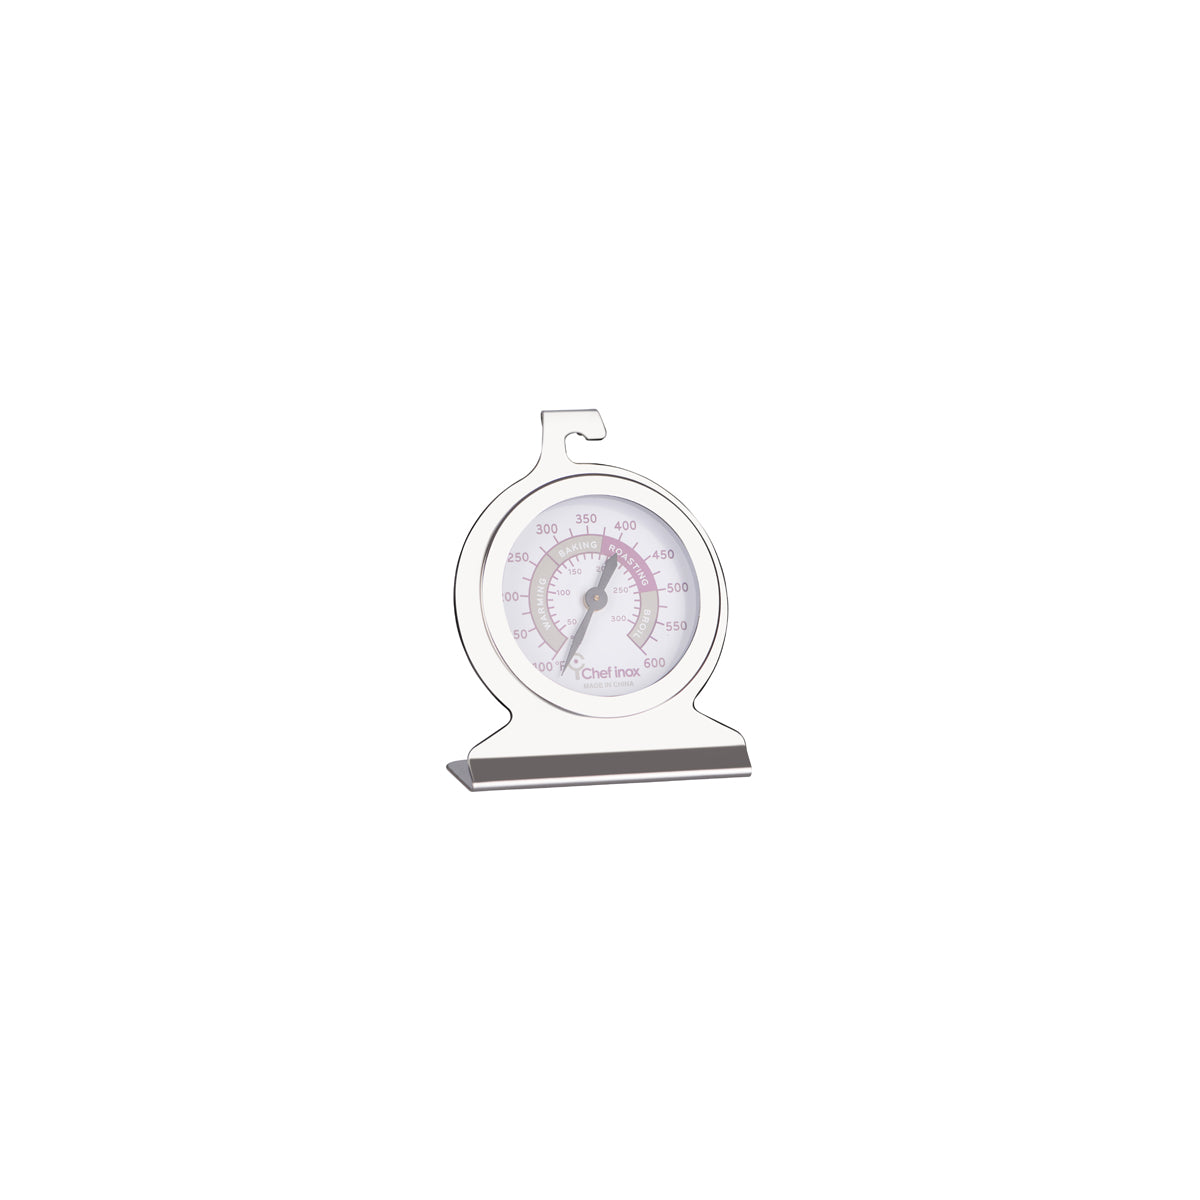 05385 Chef Inox Thermometer Oven Stand Or Hang 55x75mm Tomkin Australia Hospitality Supplies